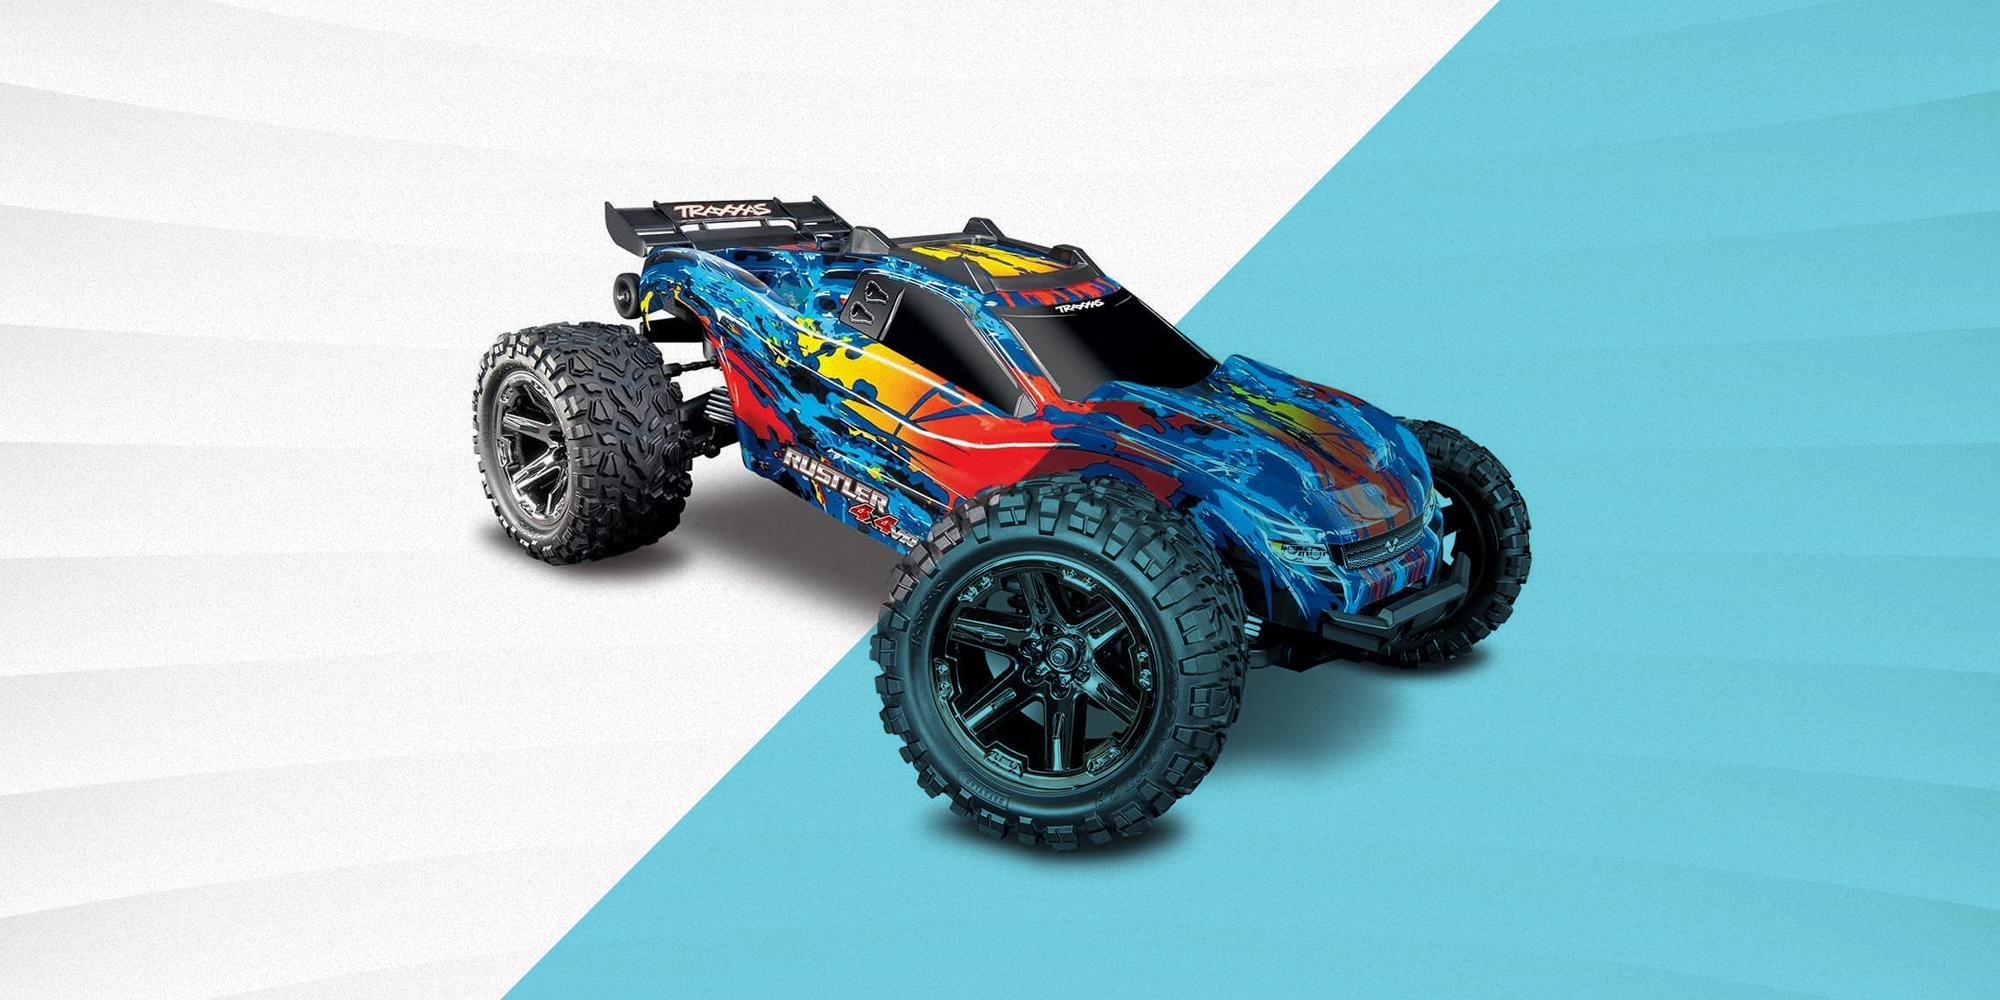 Remote Control Car Under $100: Budget-friendly remote control cars that offer top speed and durability.